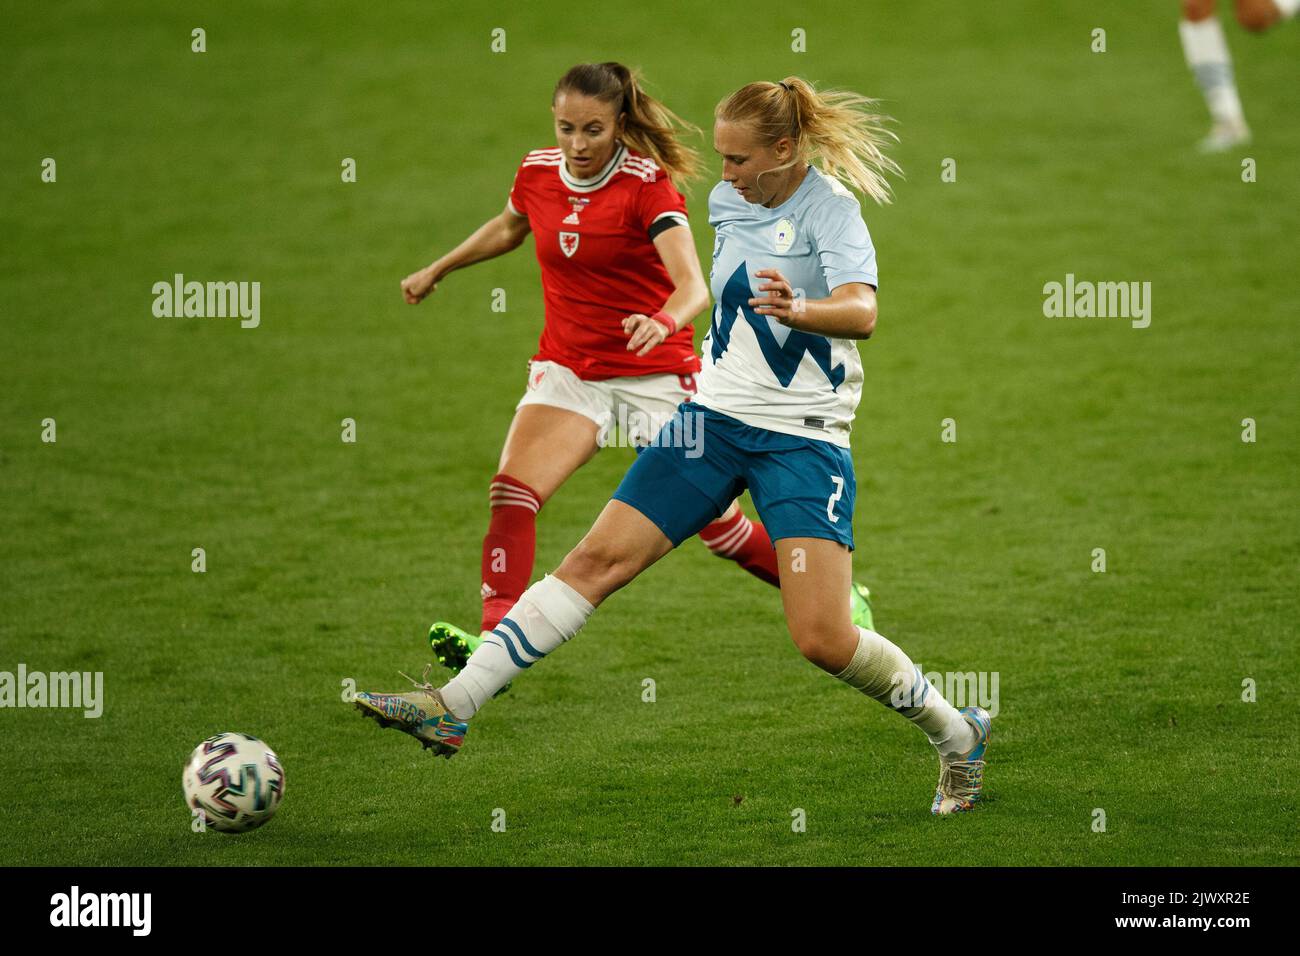 Cardiff, UK. 6th Sep, 2022. Kayleigh Green of Wales and Lana Golob of Slovenia compete during the Wales v Slovenia Women's World Cup Qualification match. Credit: Gruffydd Thomas/Alamy Live News Stock Photo